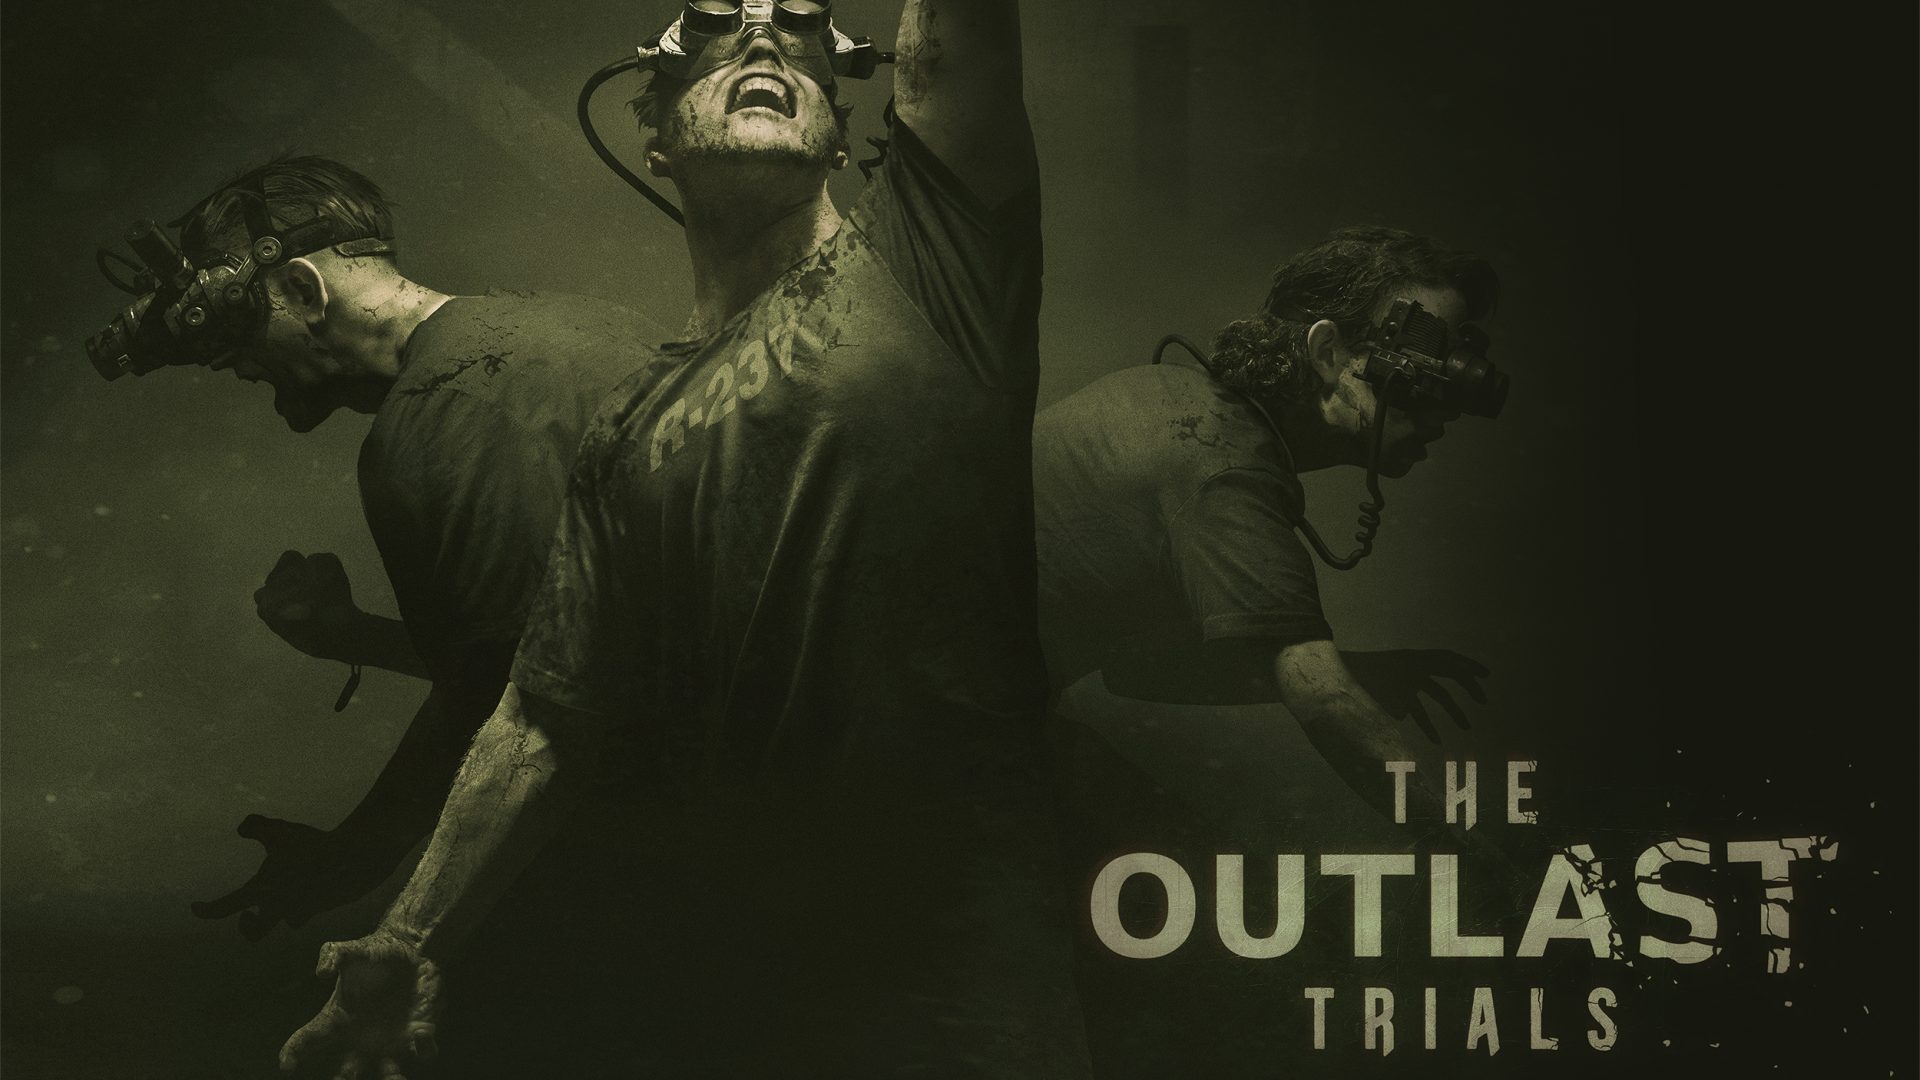 The Outlast Trials is the next game in The Outlast series